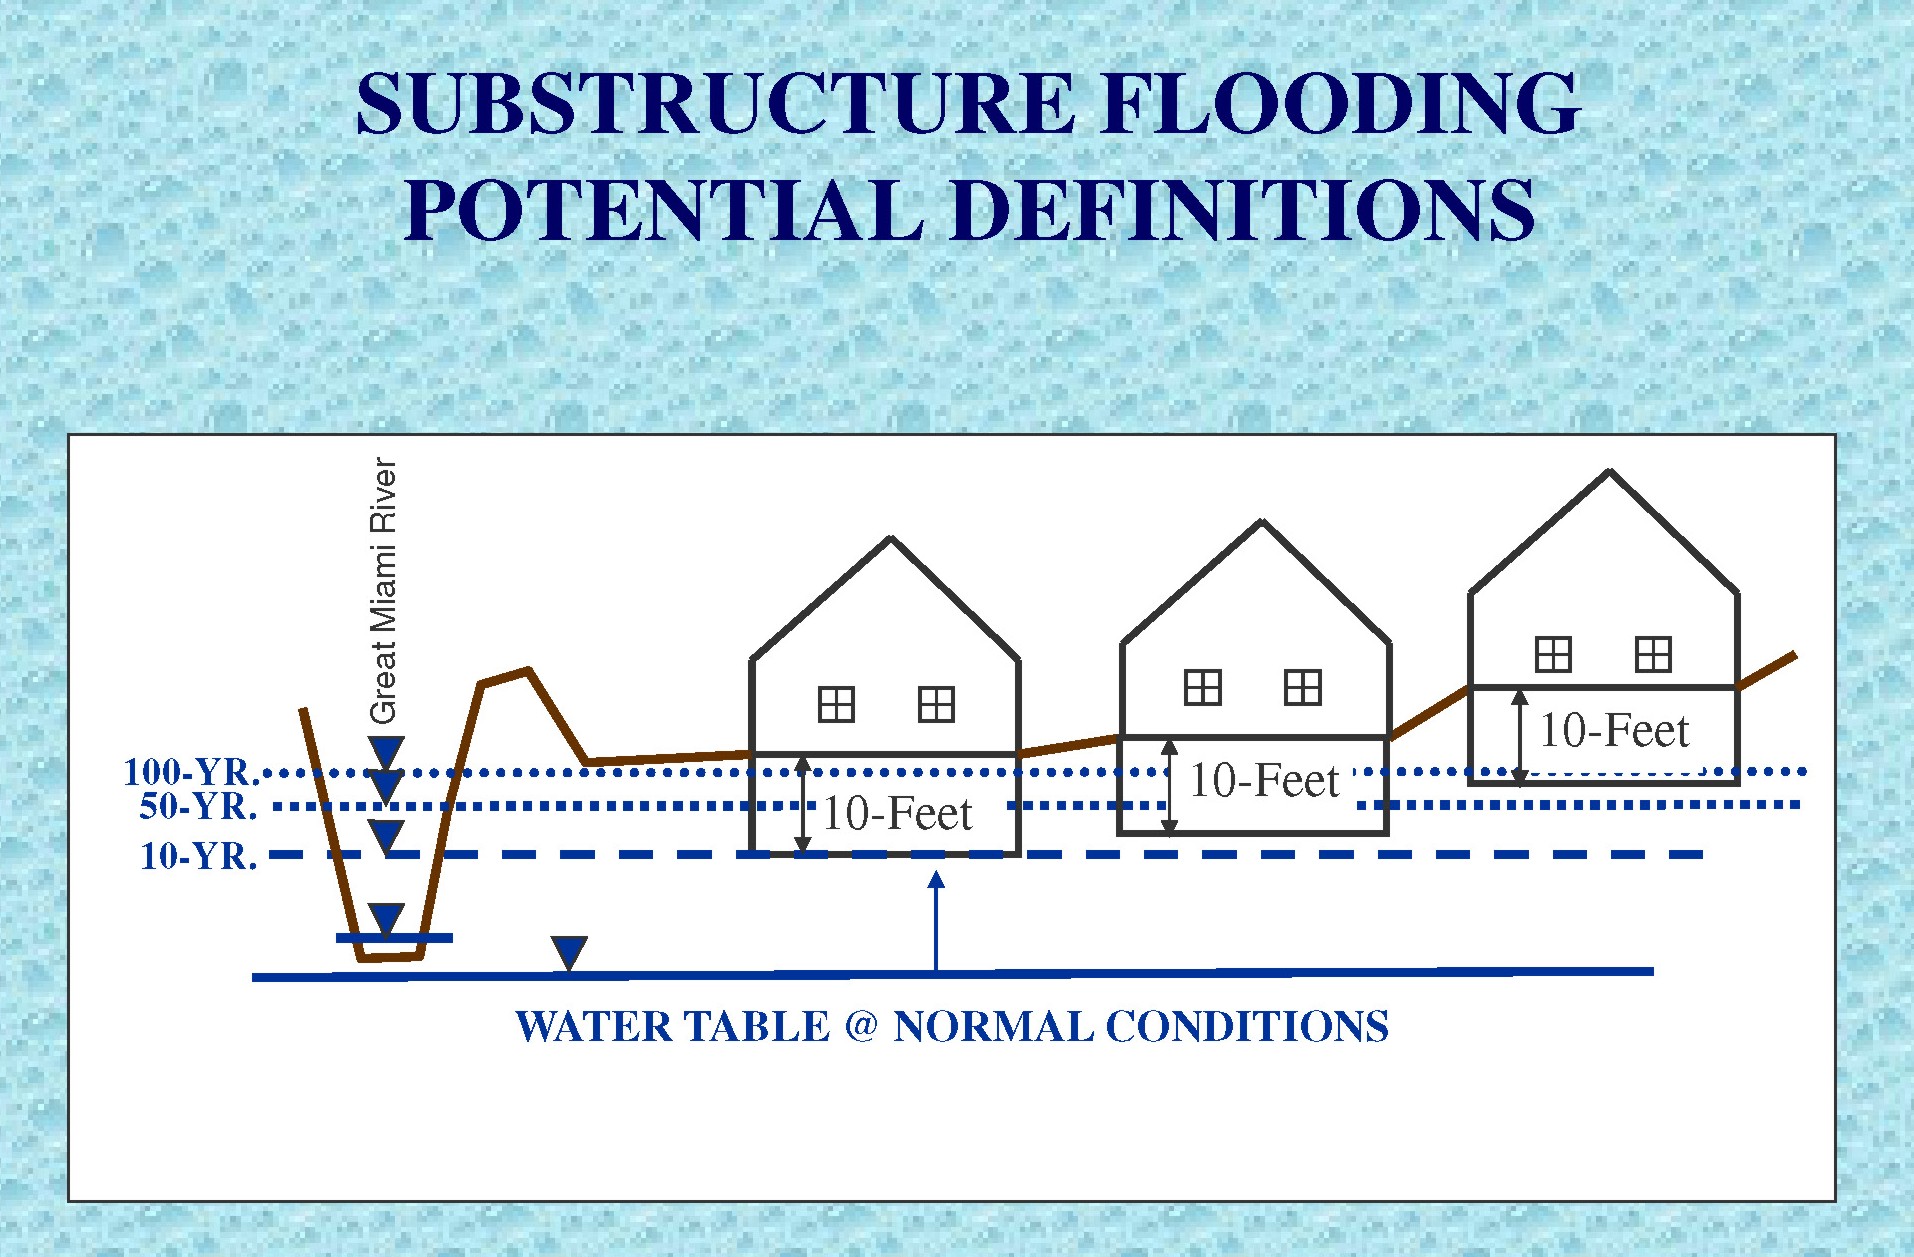 Substructure flooding definitions